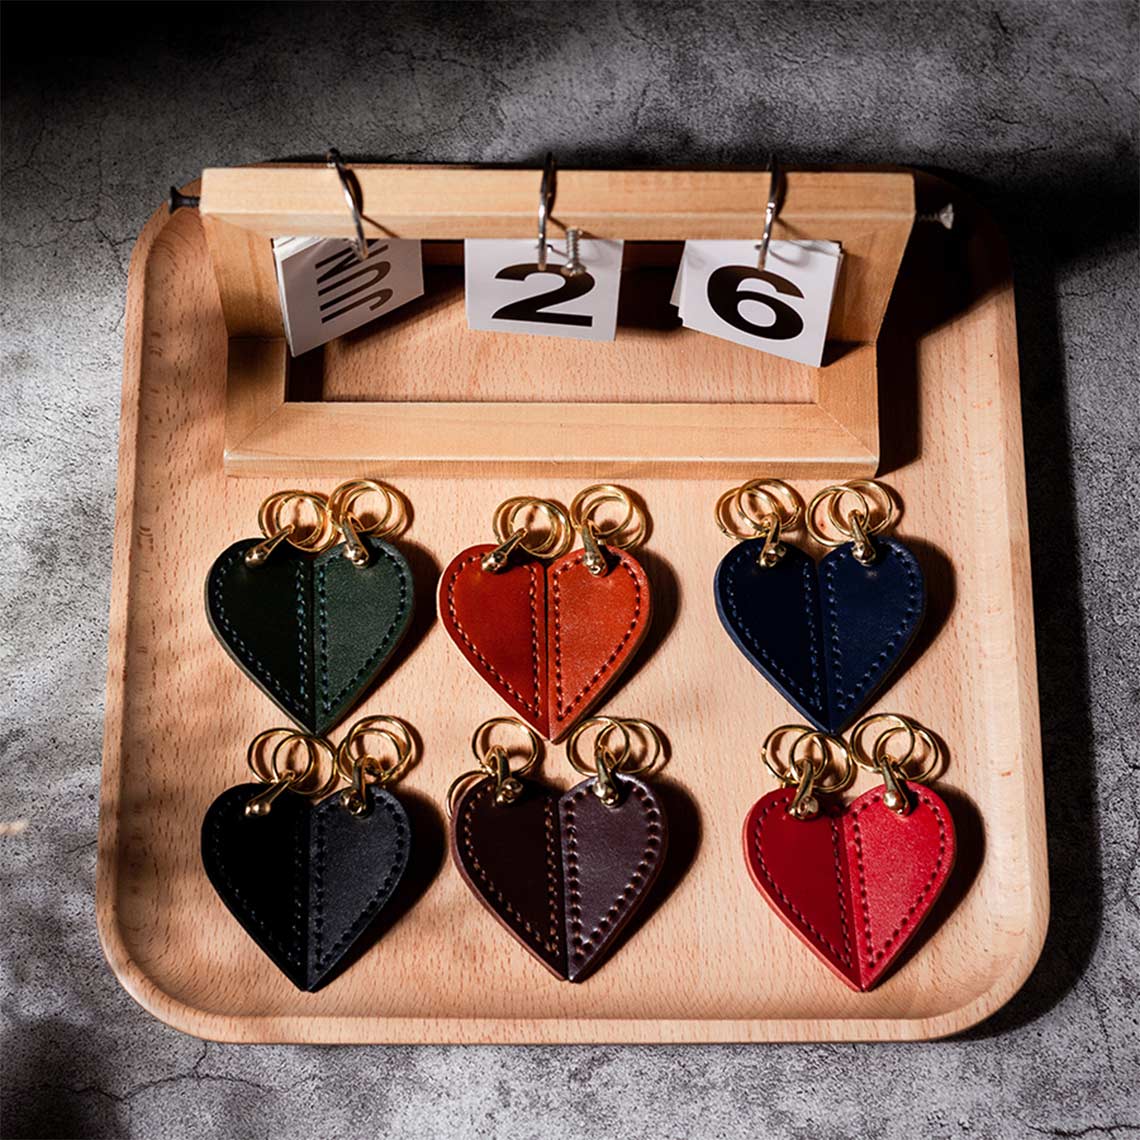 POPSEWING® Vegetable Tanned Leather Valentine Heart Keychain DIY Kits